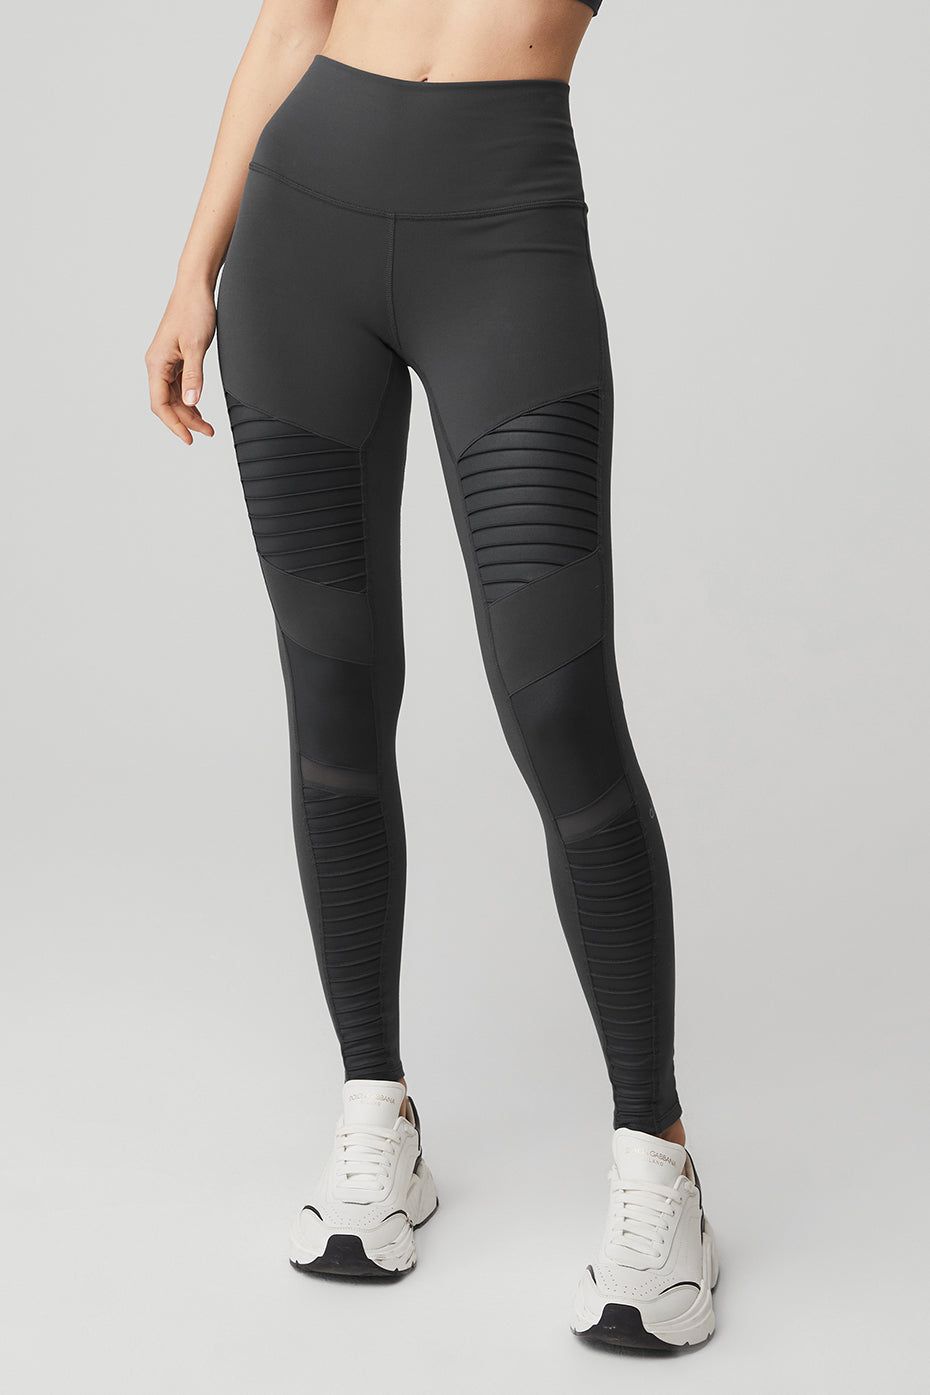 Alo Yoga Airlift High-Waist Suit Up Legging Black Size M, Women's Fashion,  Activewear on Carousell